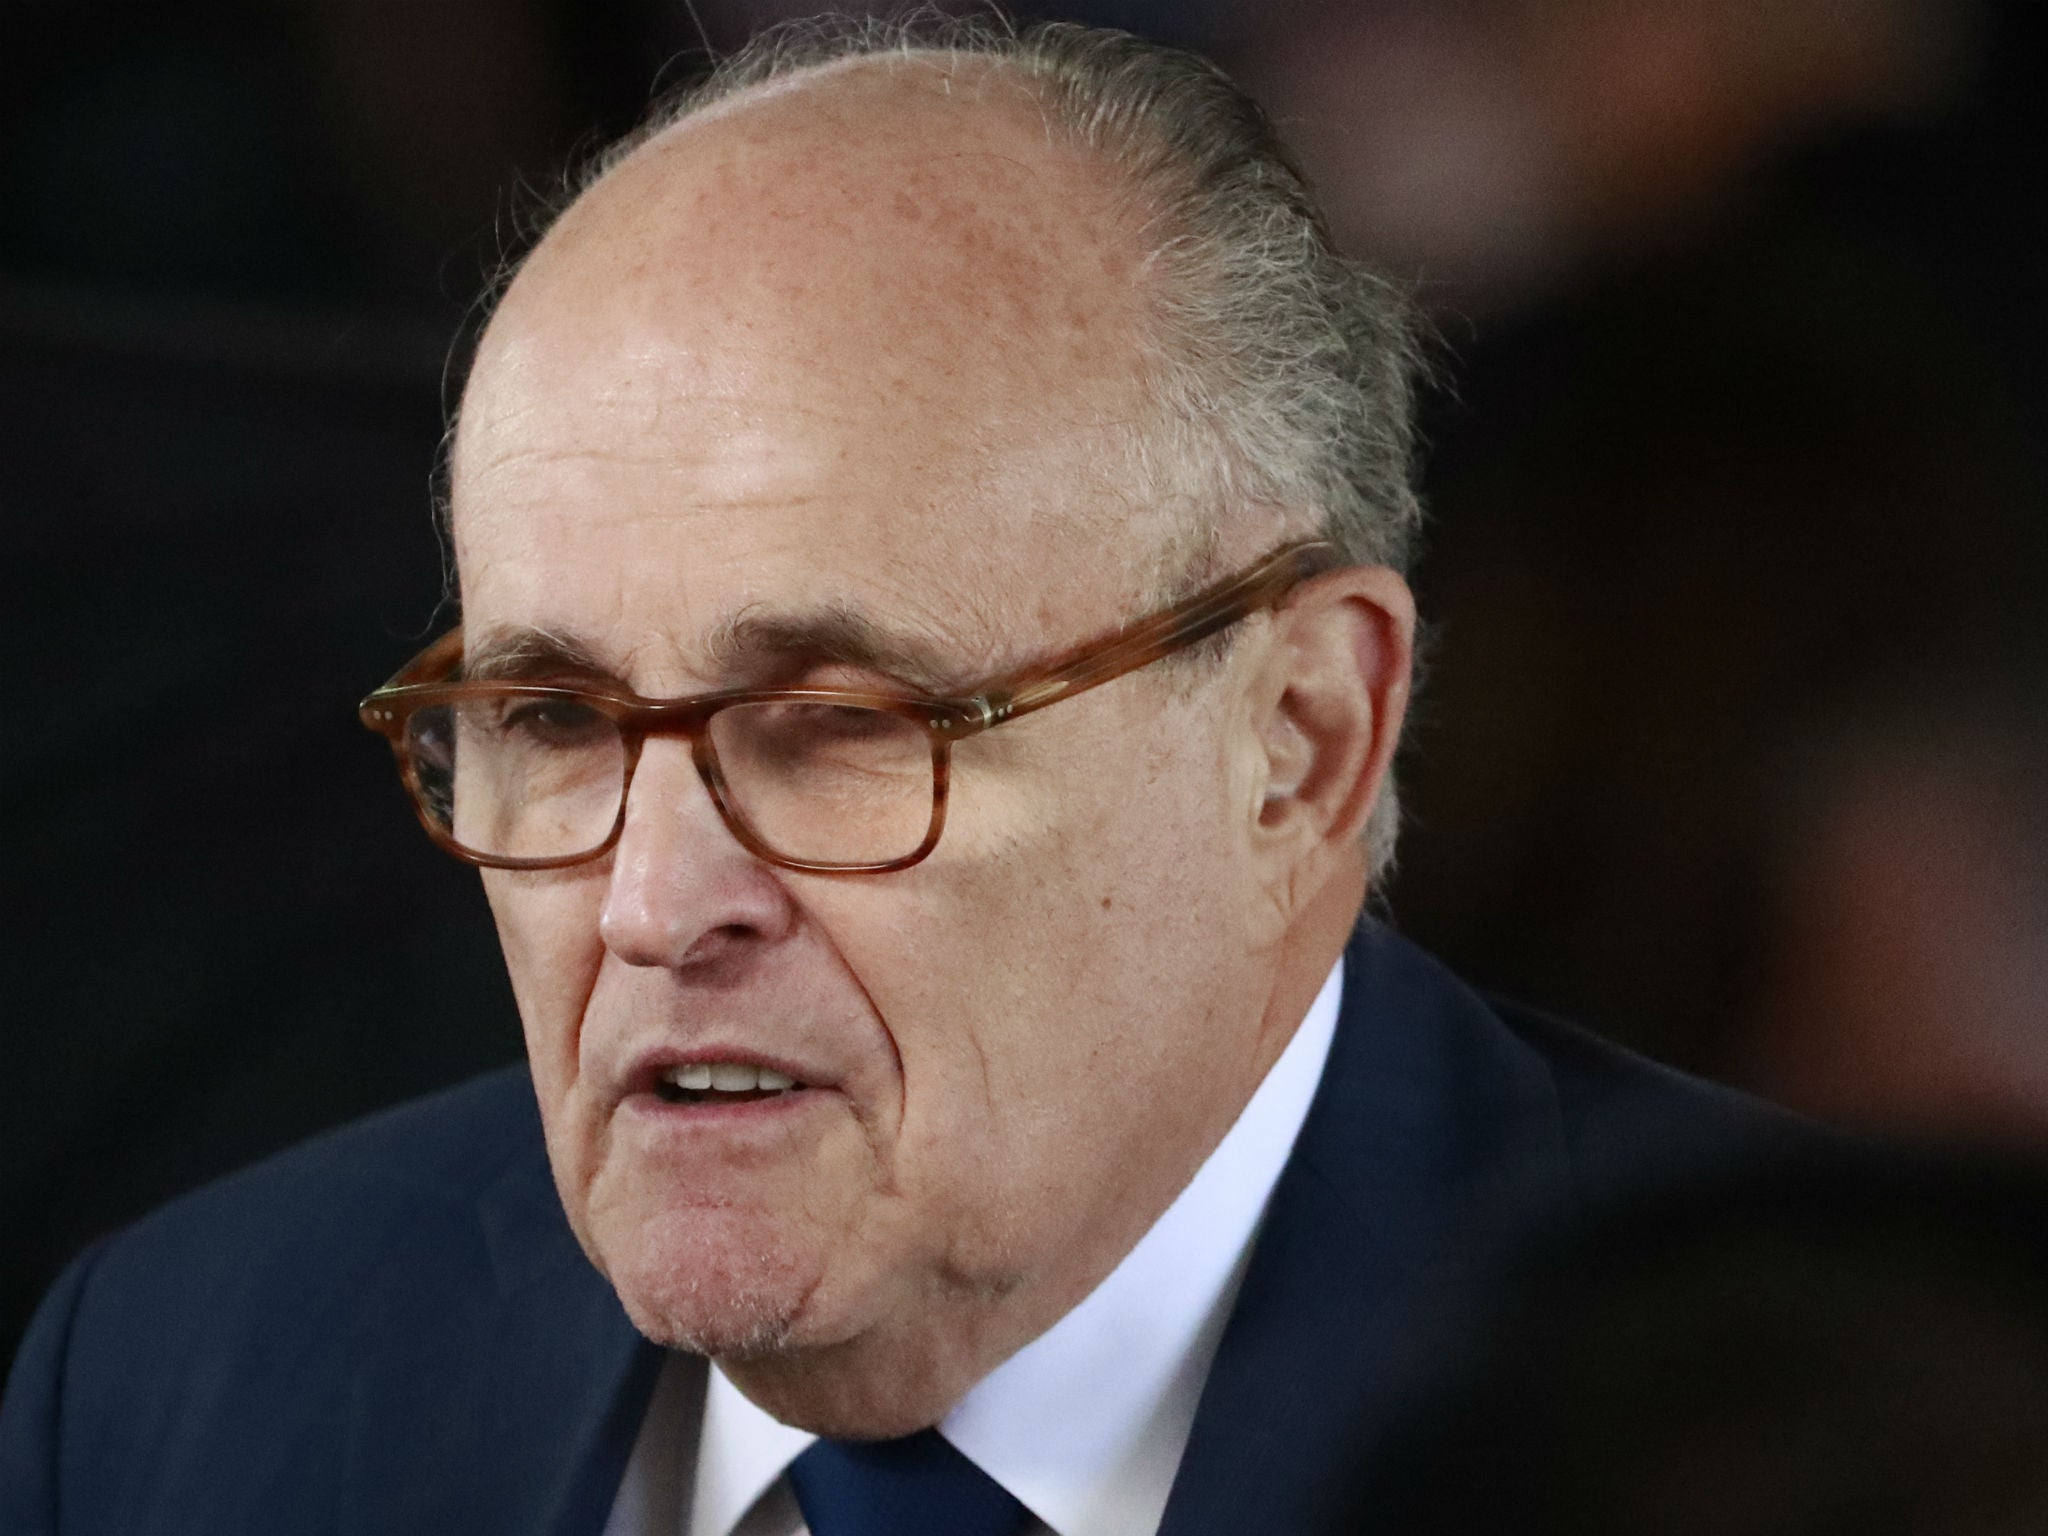 Former New York City Mayor Rudy Giuliani is a strong ally of Donald Trump